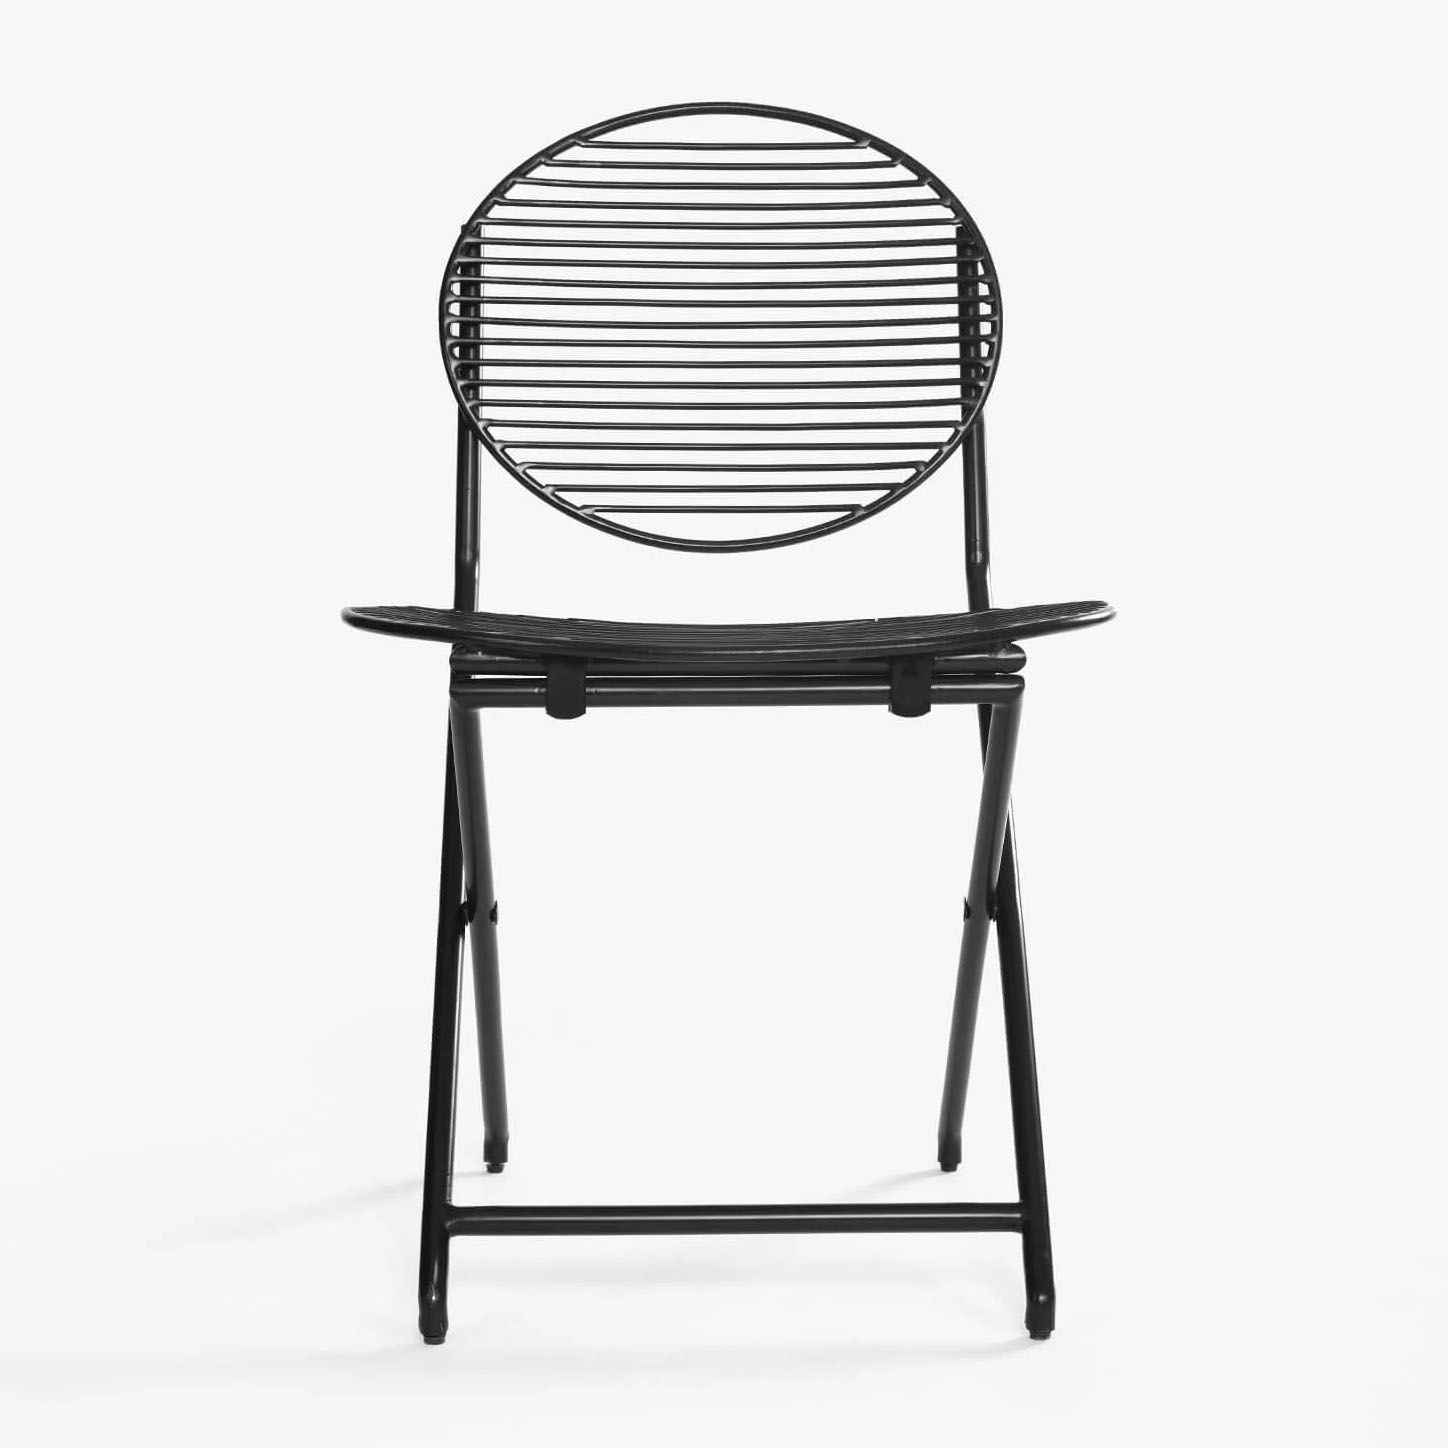 Ortside Textiline Dining Chair